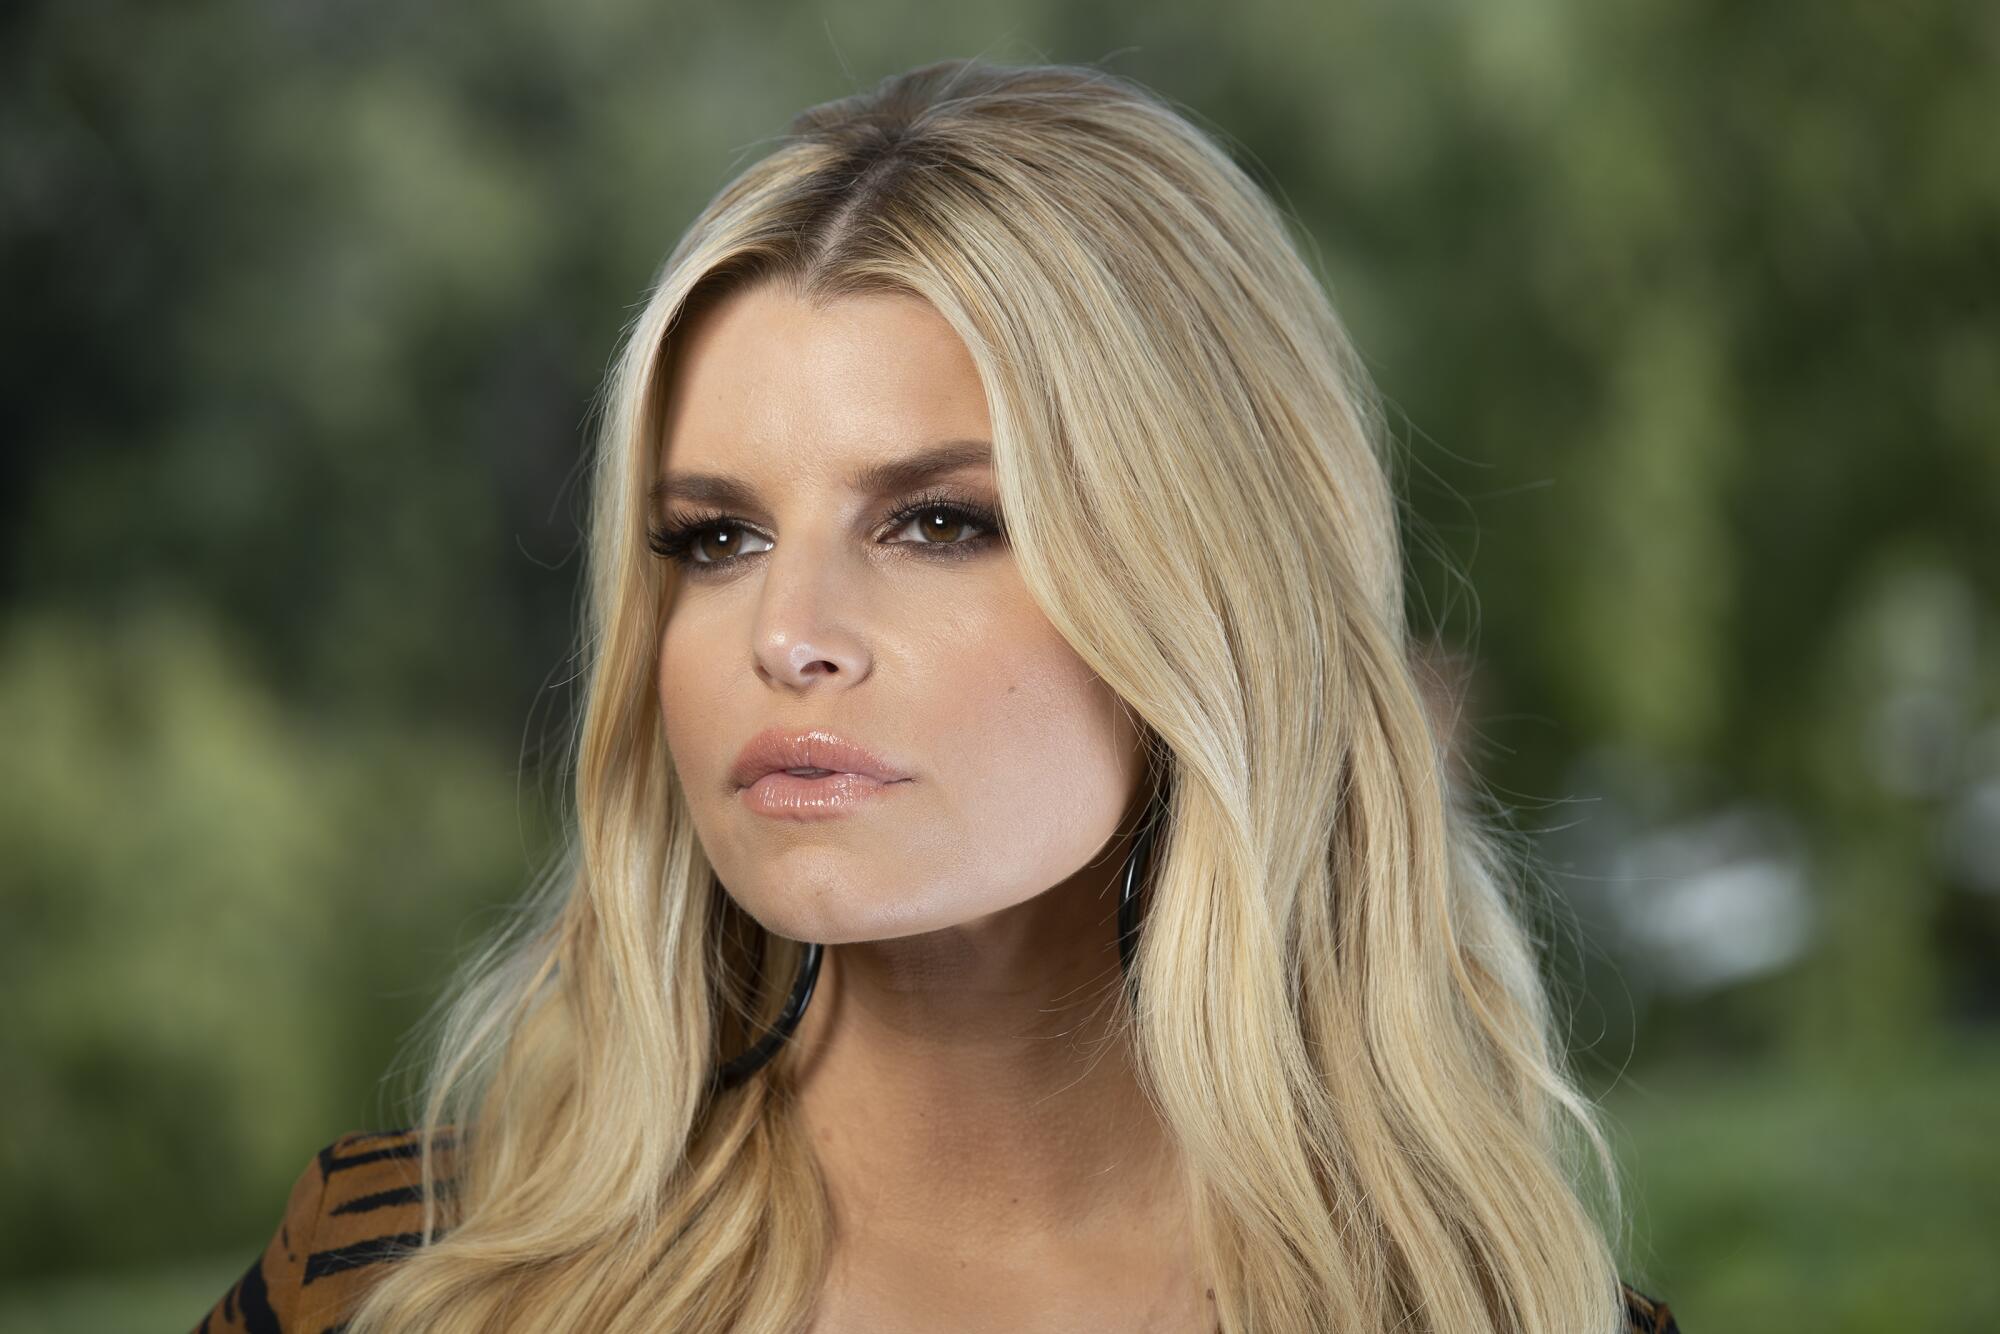 Singer and actress Jessica Simpson at her home in Hidden Hills.